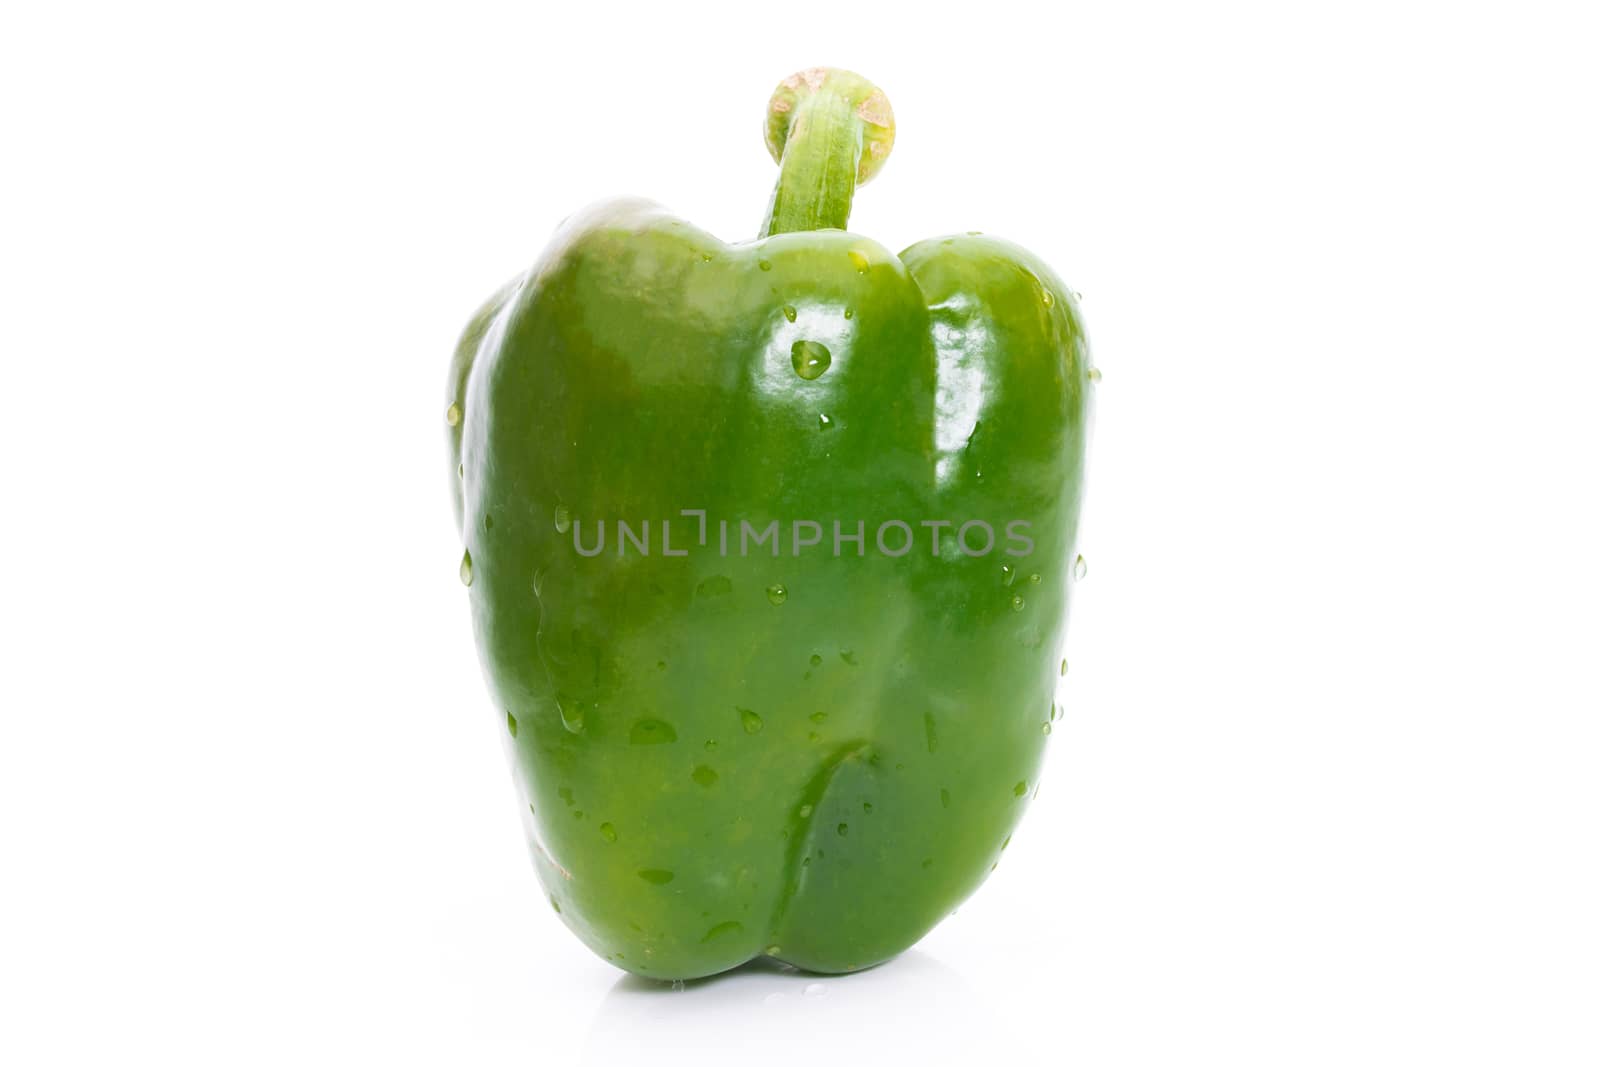 Large bell pepper green on a white background